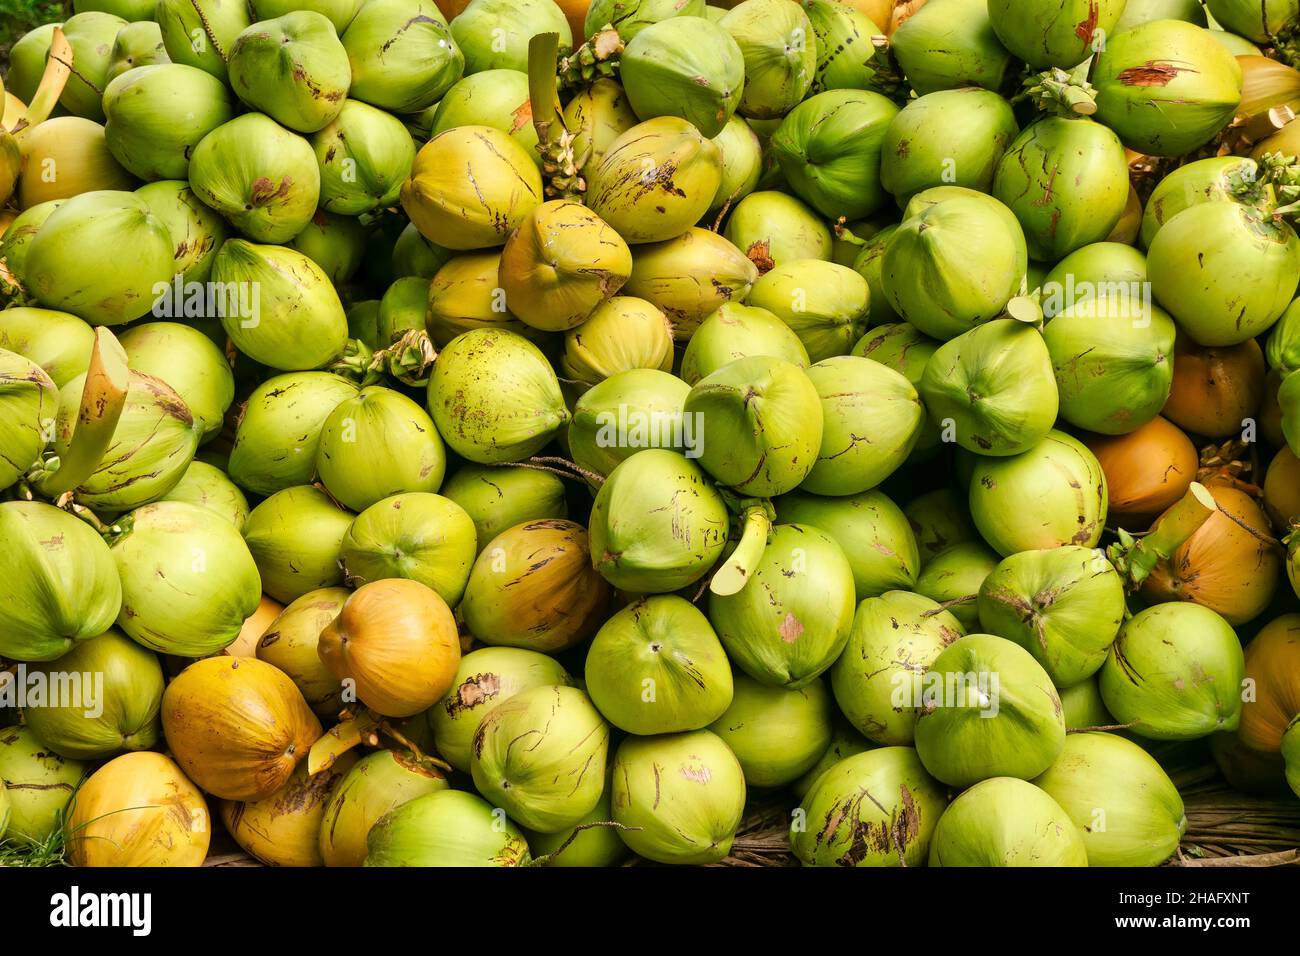 Overhead view of a large pile of freshly harvested coconuts in the Philippines, where copra production is an important industry. Stock Photo